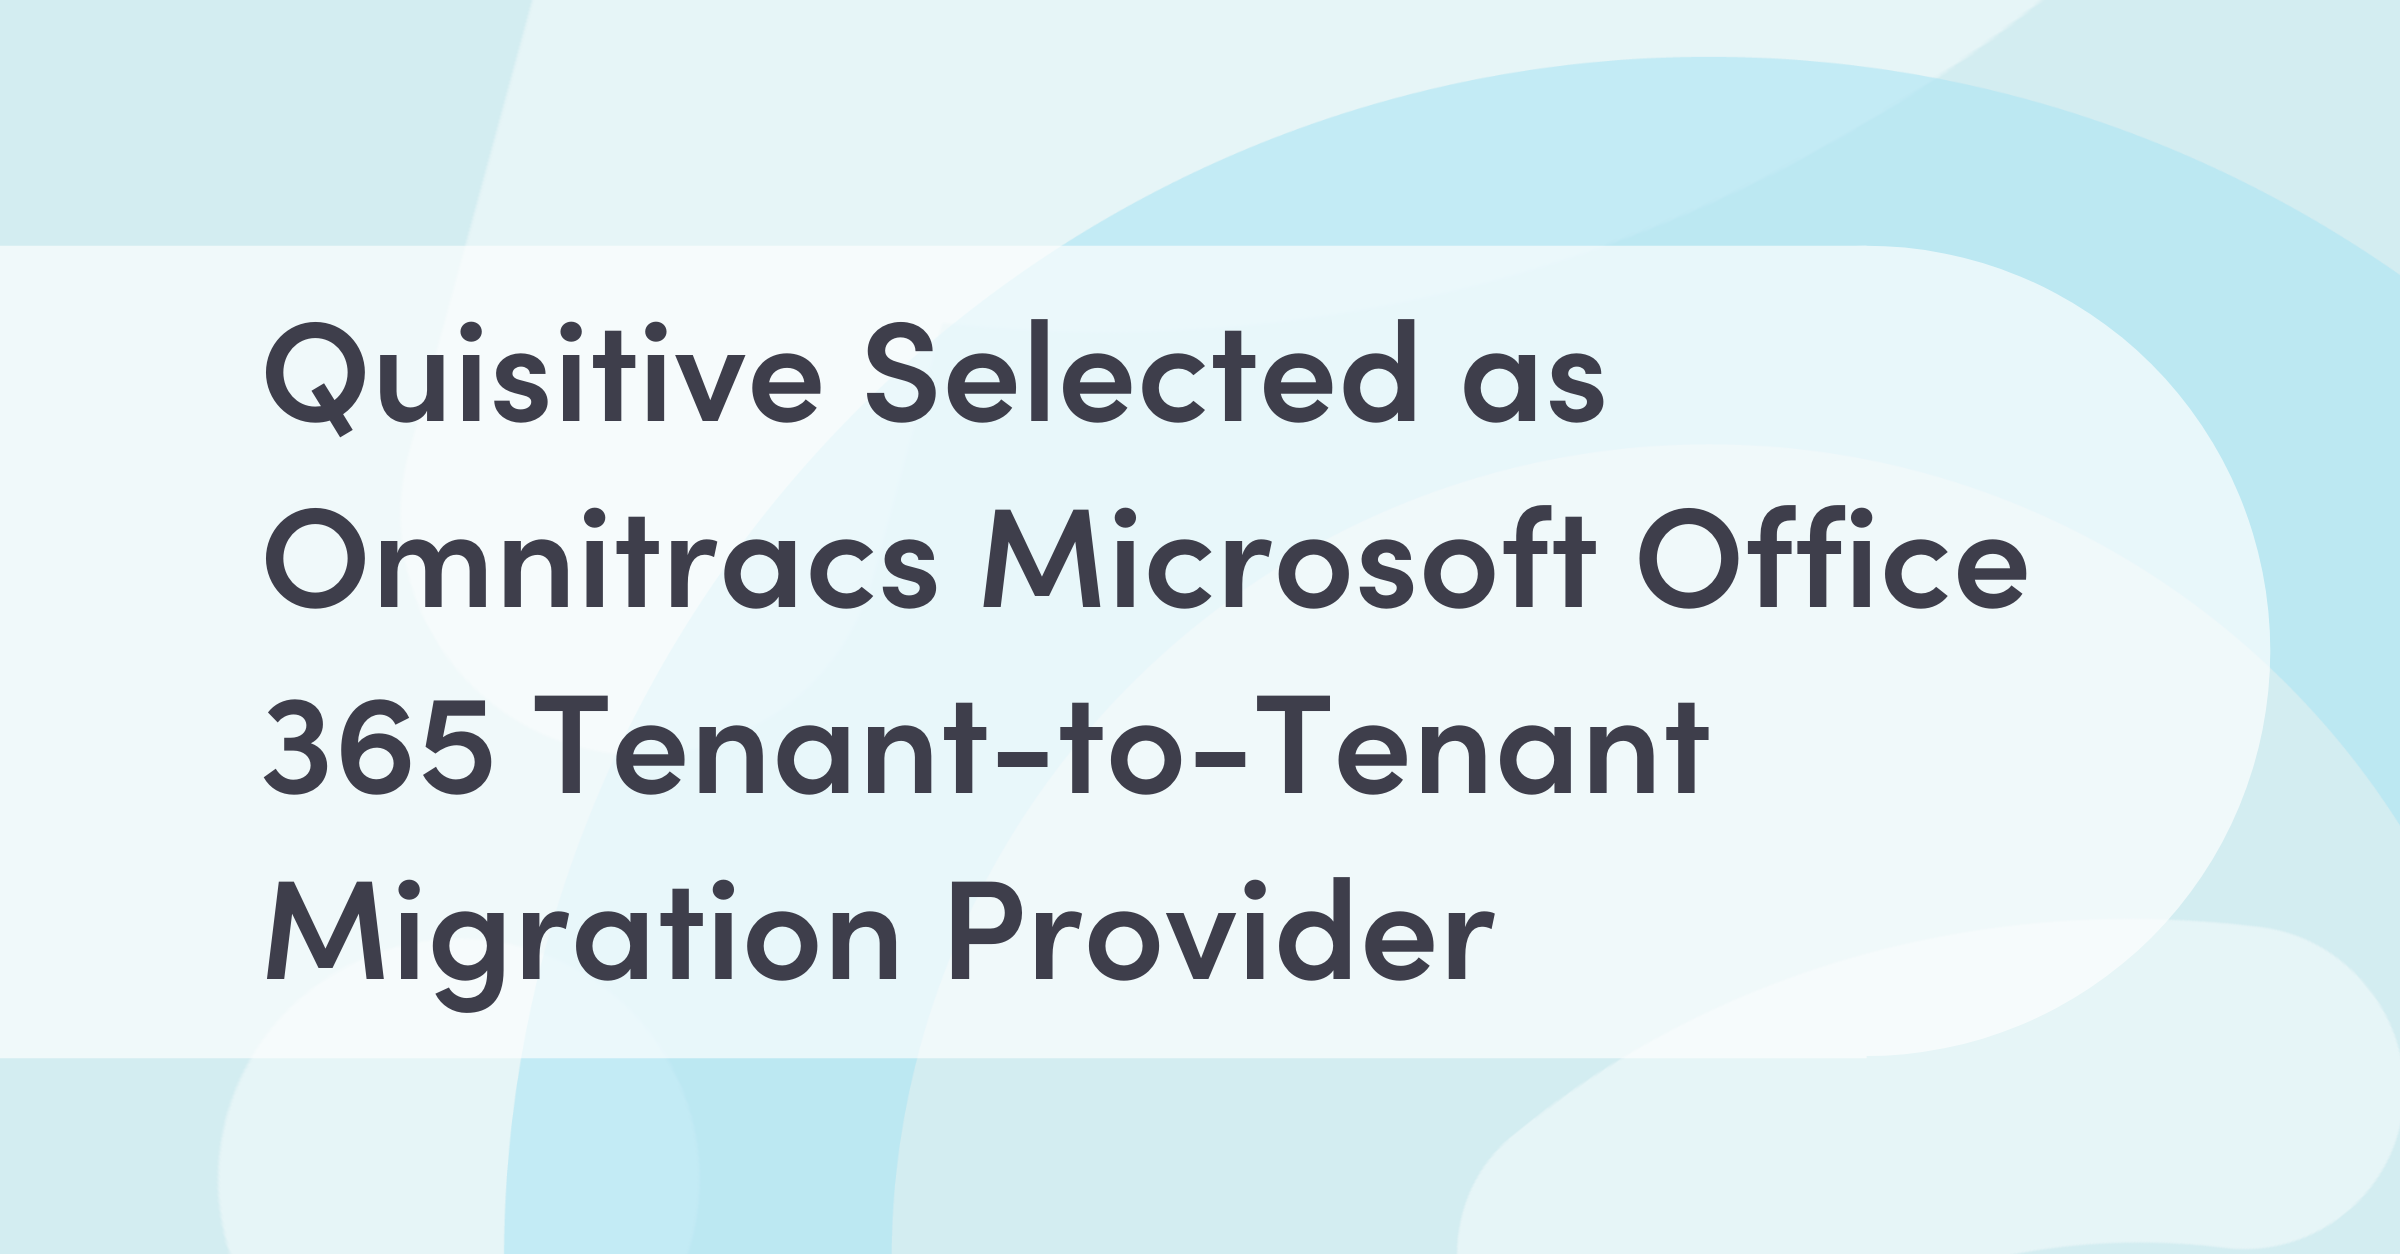 Quisitive Selected as Omnitracs Microsoft Office 365 Tenant-to-Tenant Migration Provider